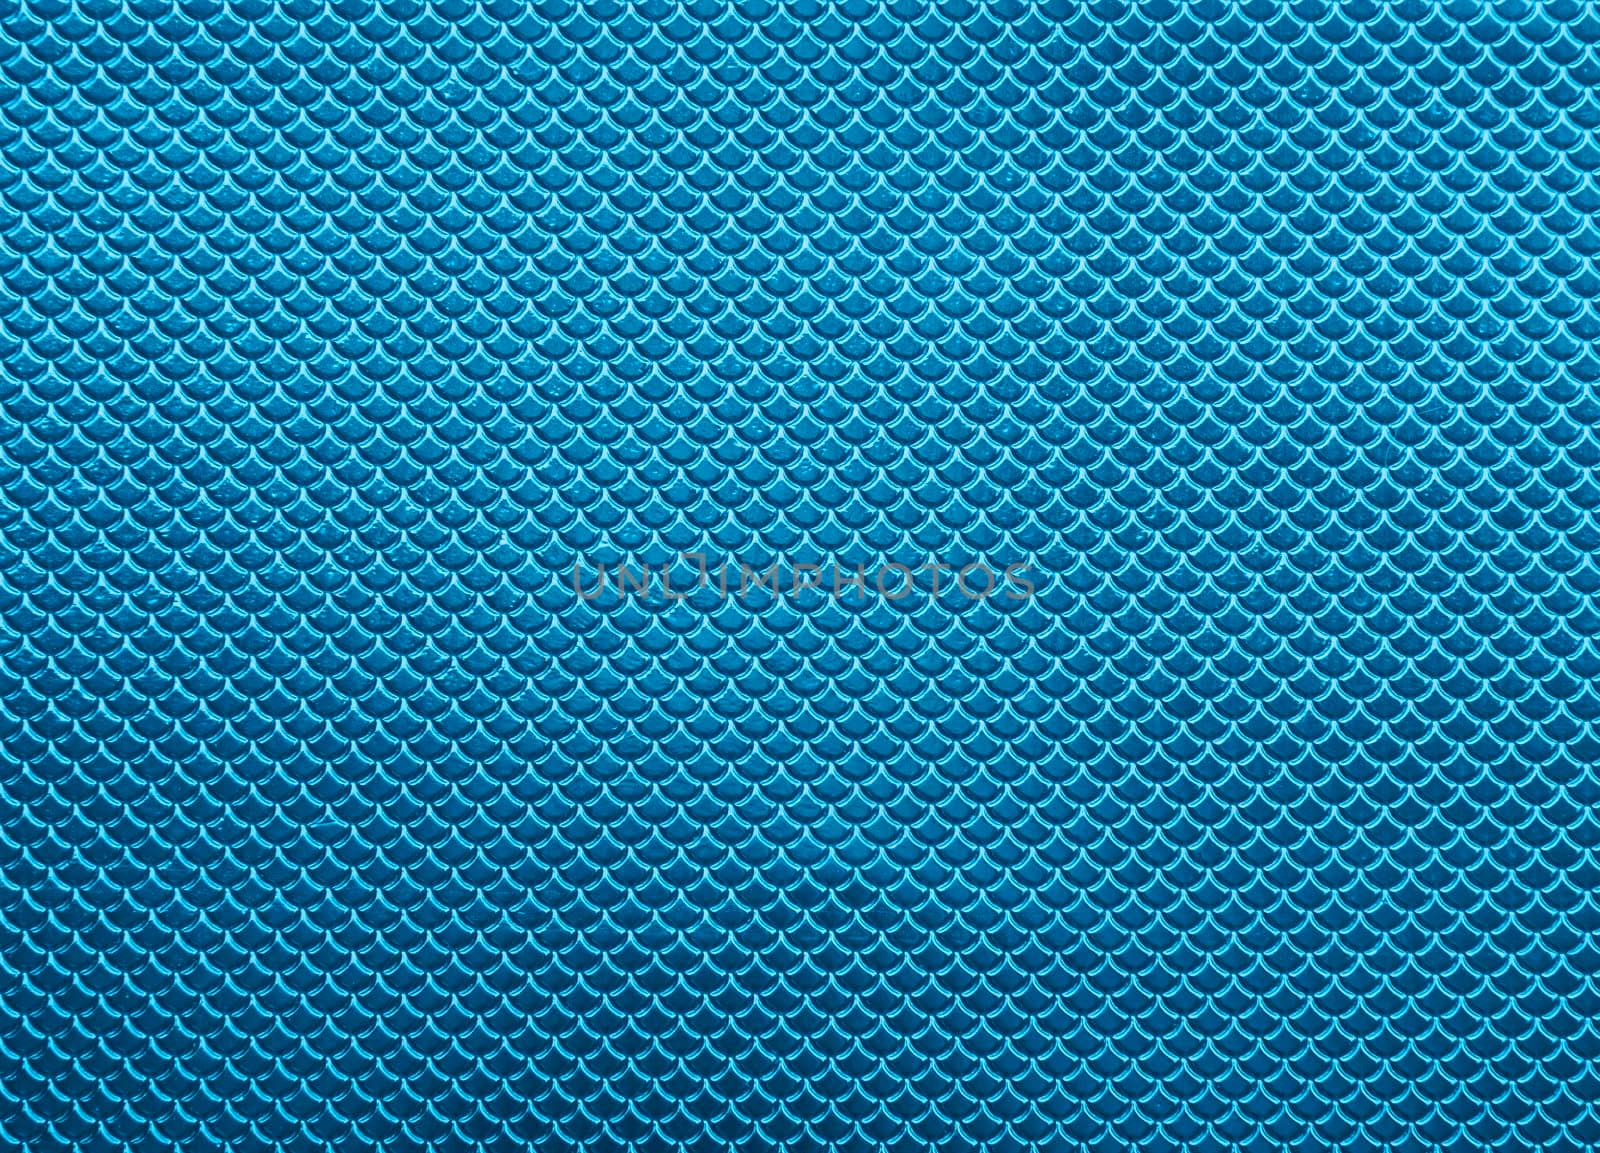 Abstract background of glossy shiny metallic vivid blue scale shape pattern